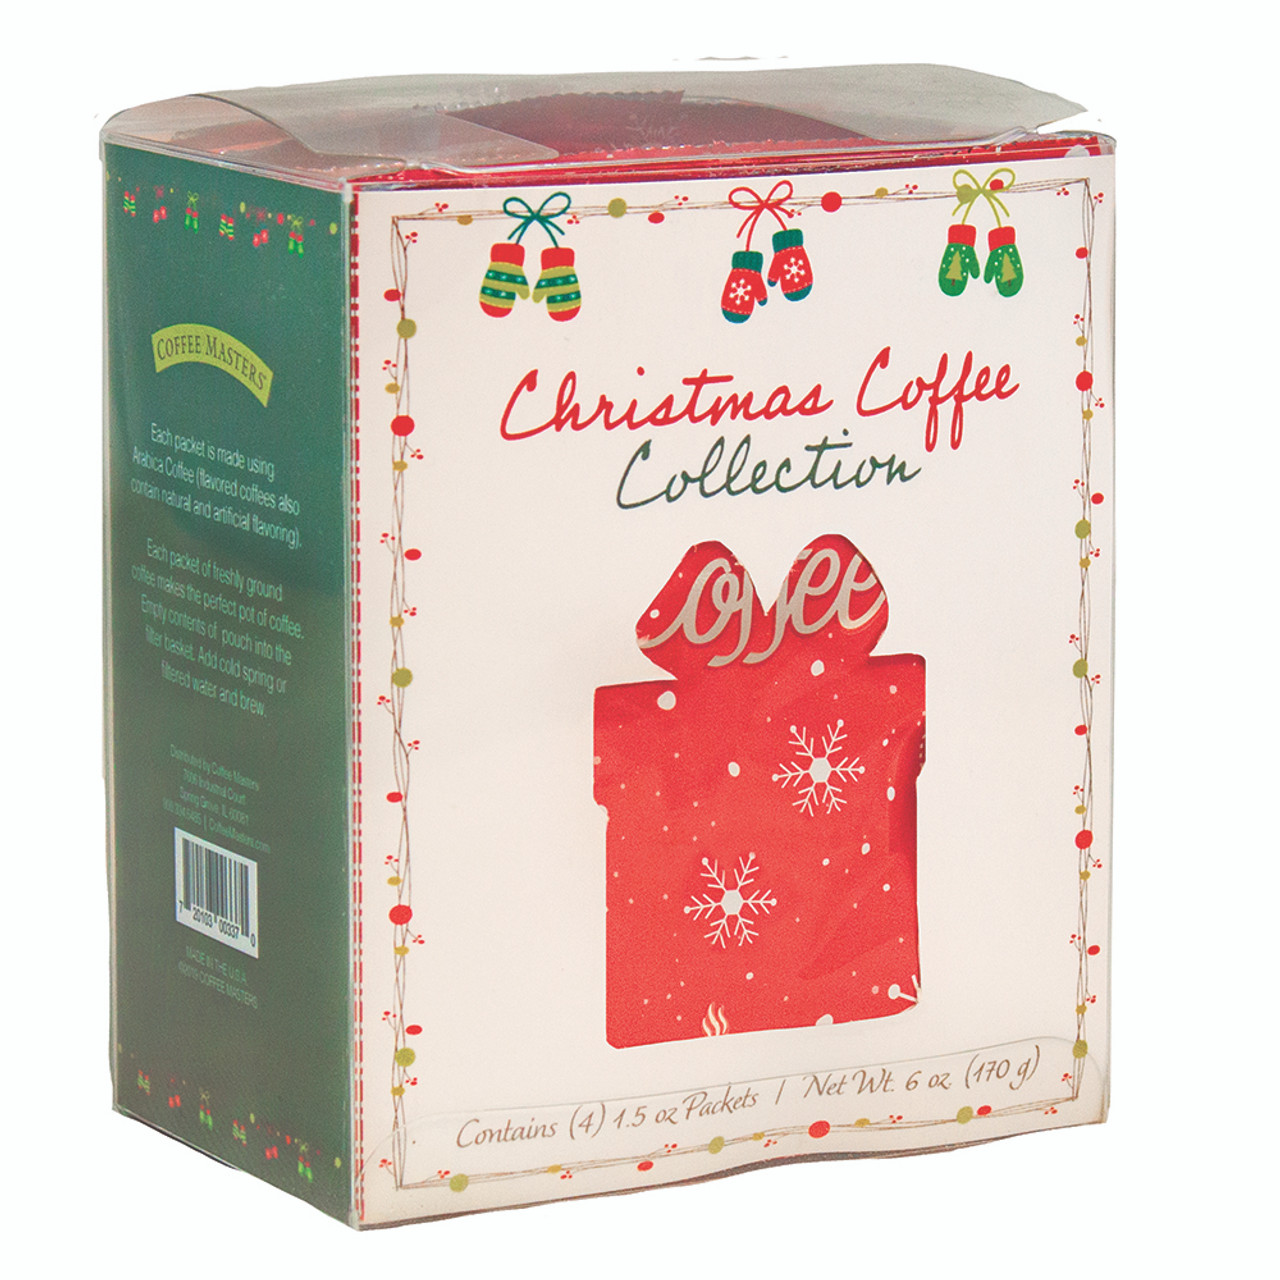 A Christmas Coffee Collection box on a white background.